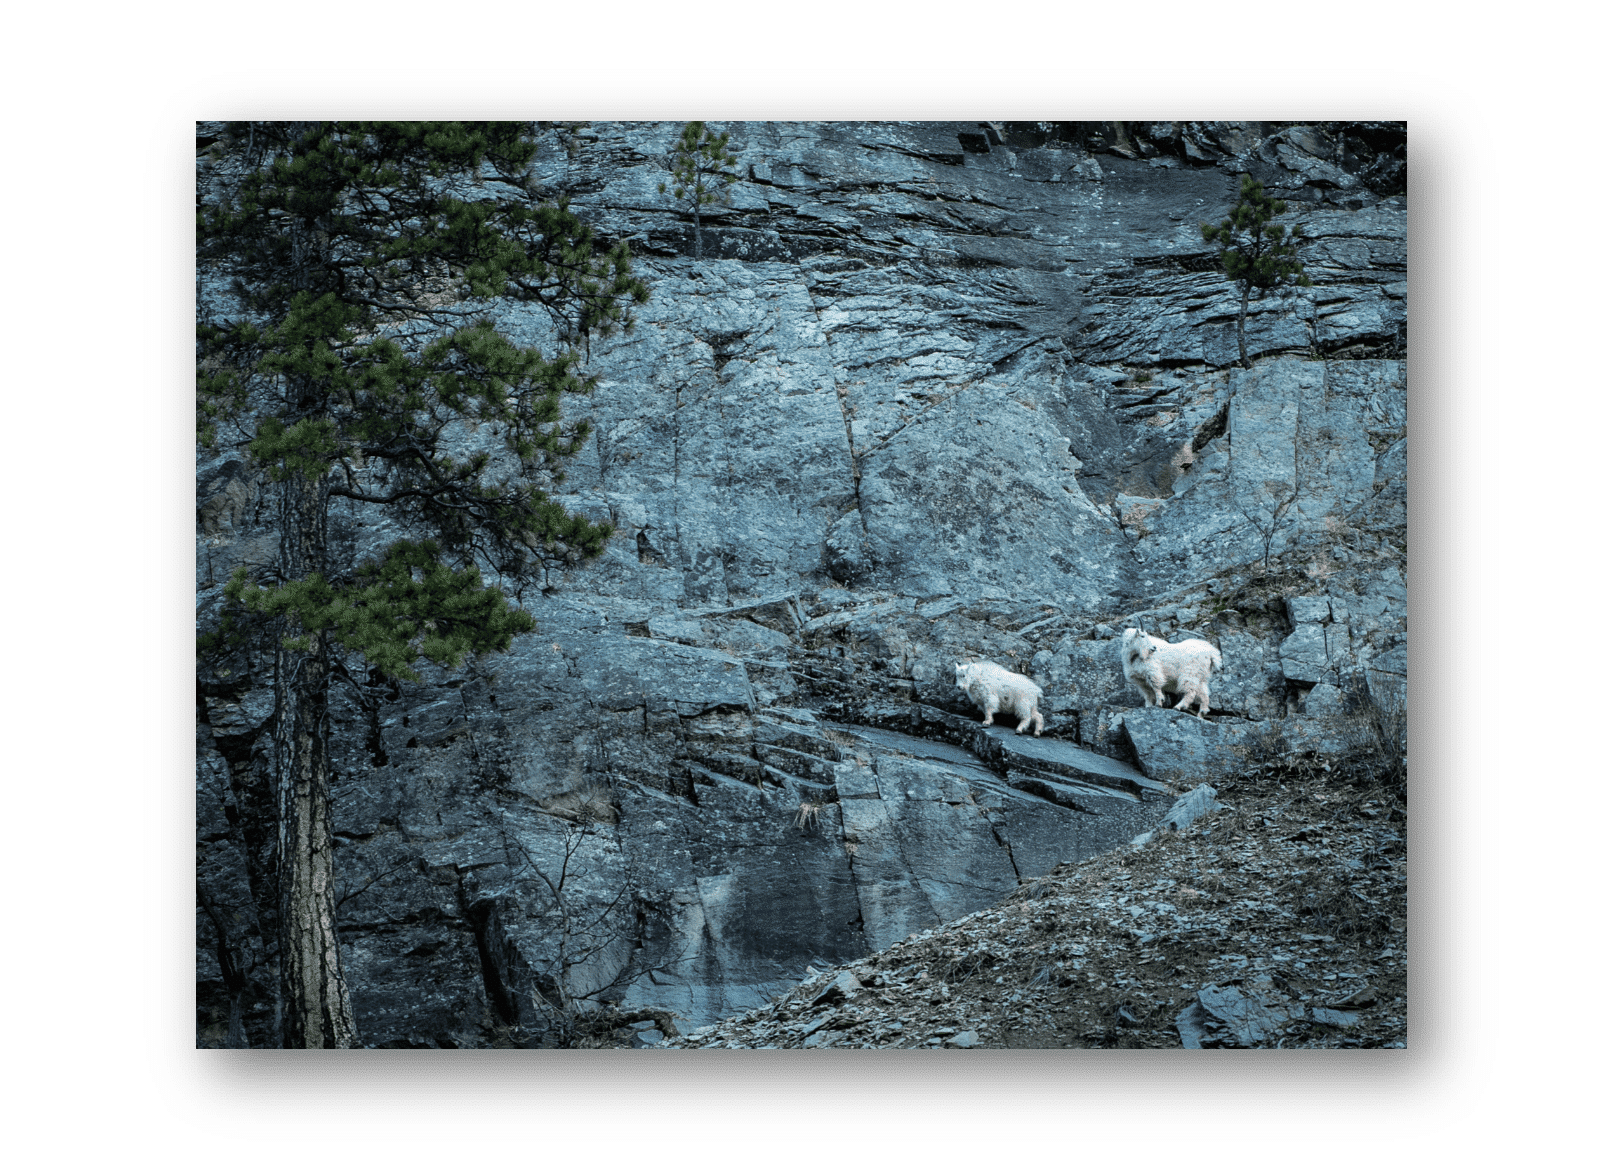 Goats in the Canyon” Greeting Card